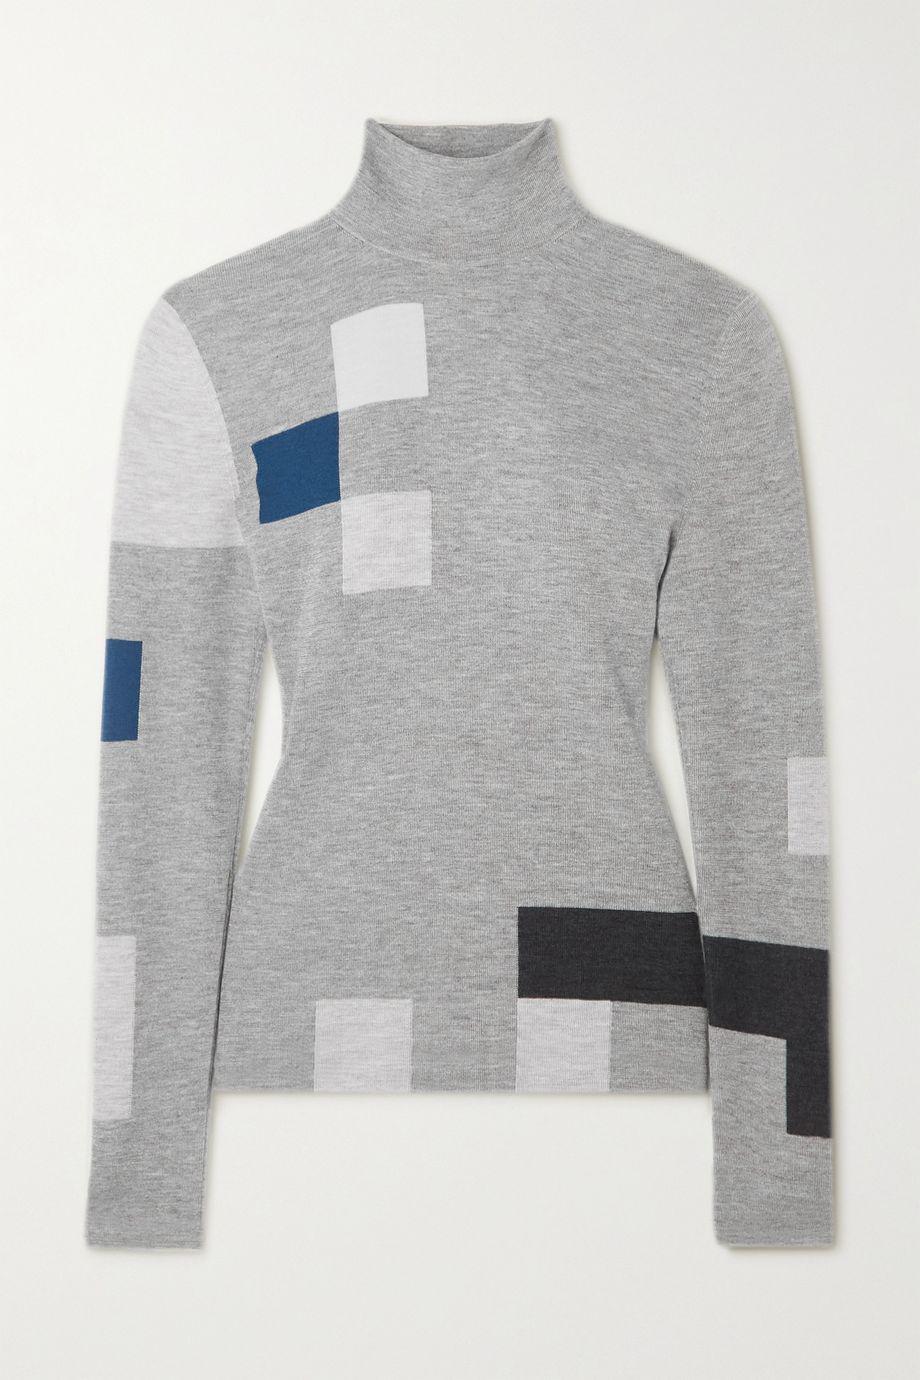 Patchwork cashmere and silk-blend turtleneck sweater by AKRIS